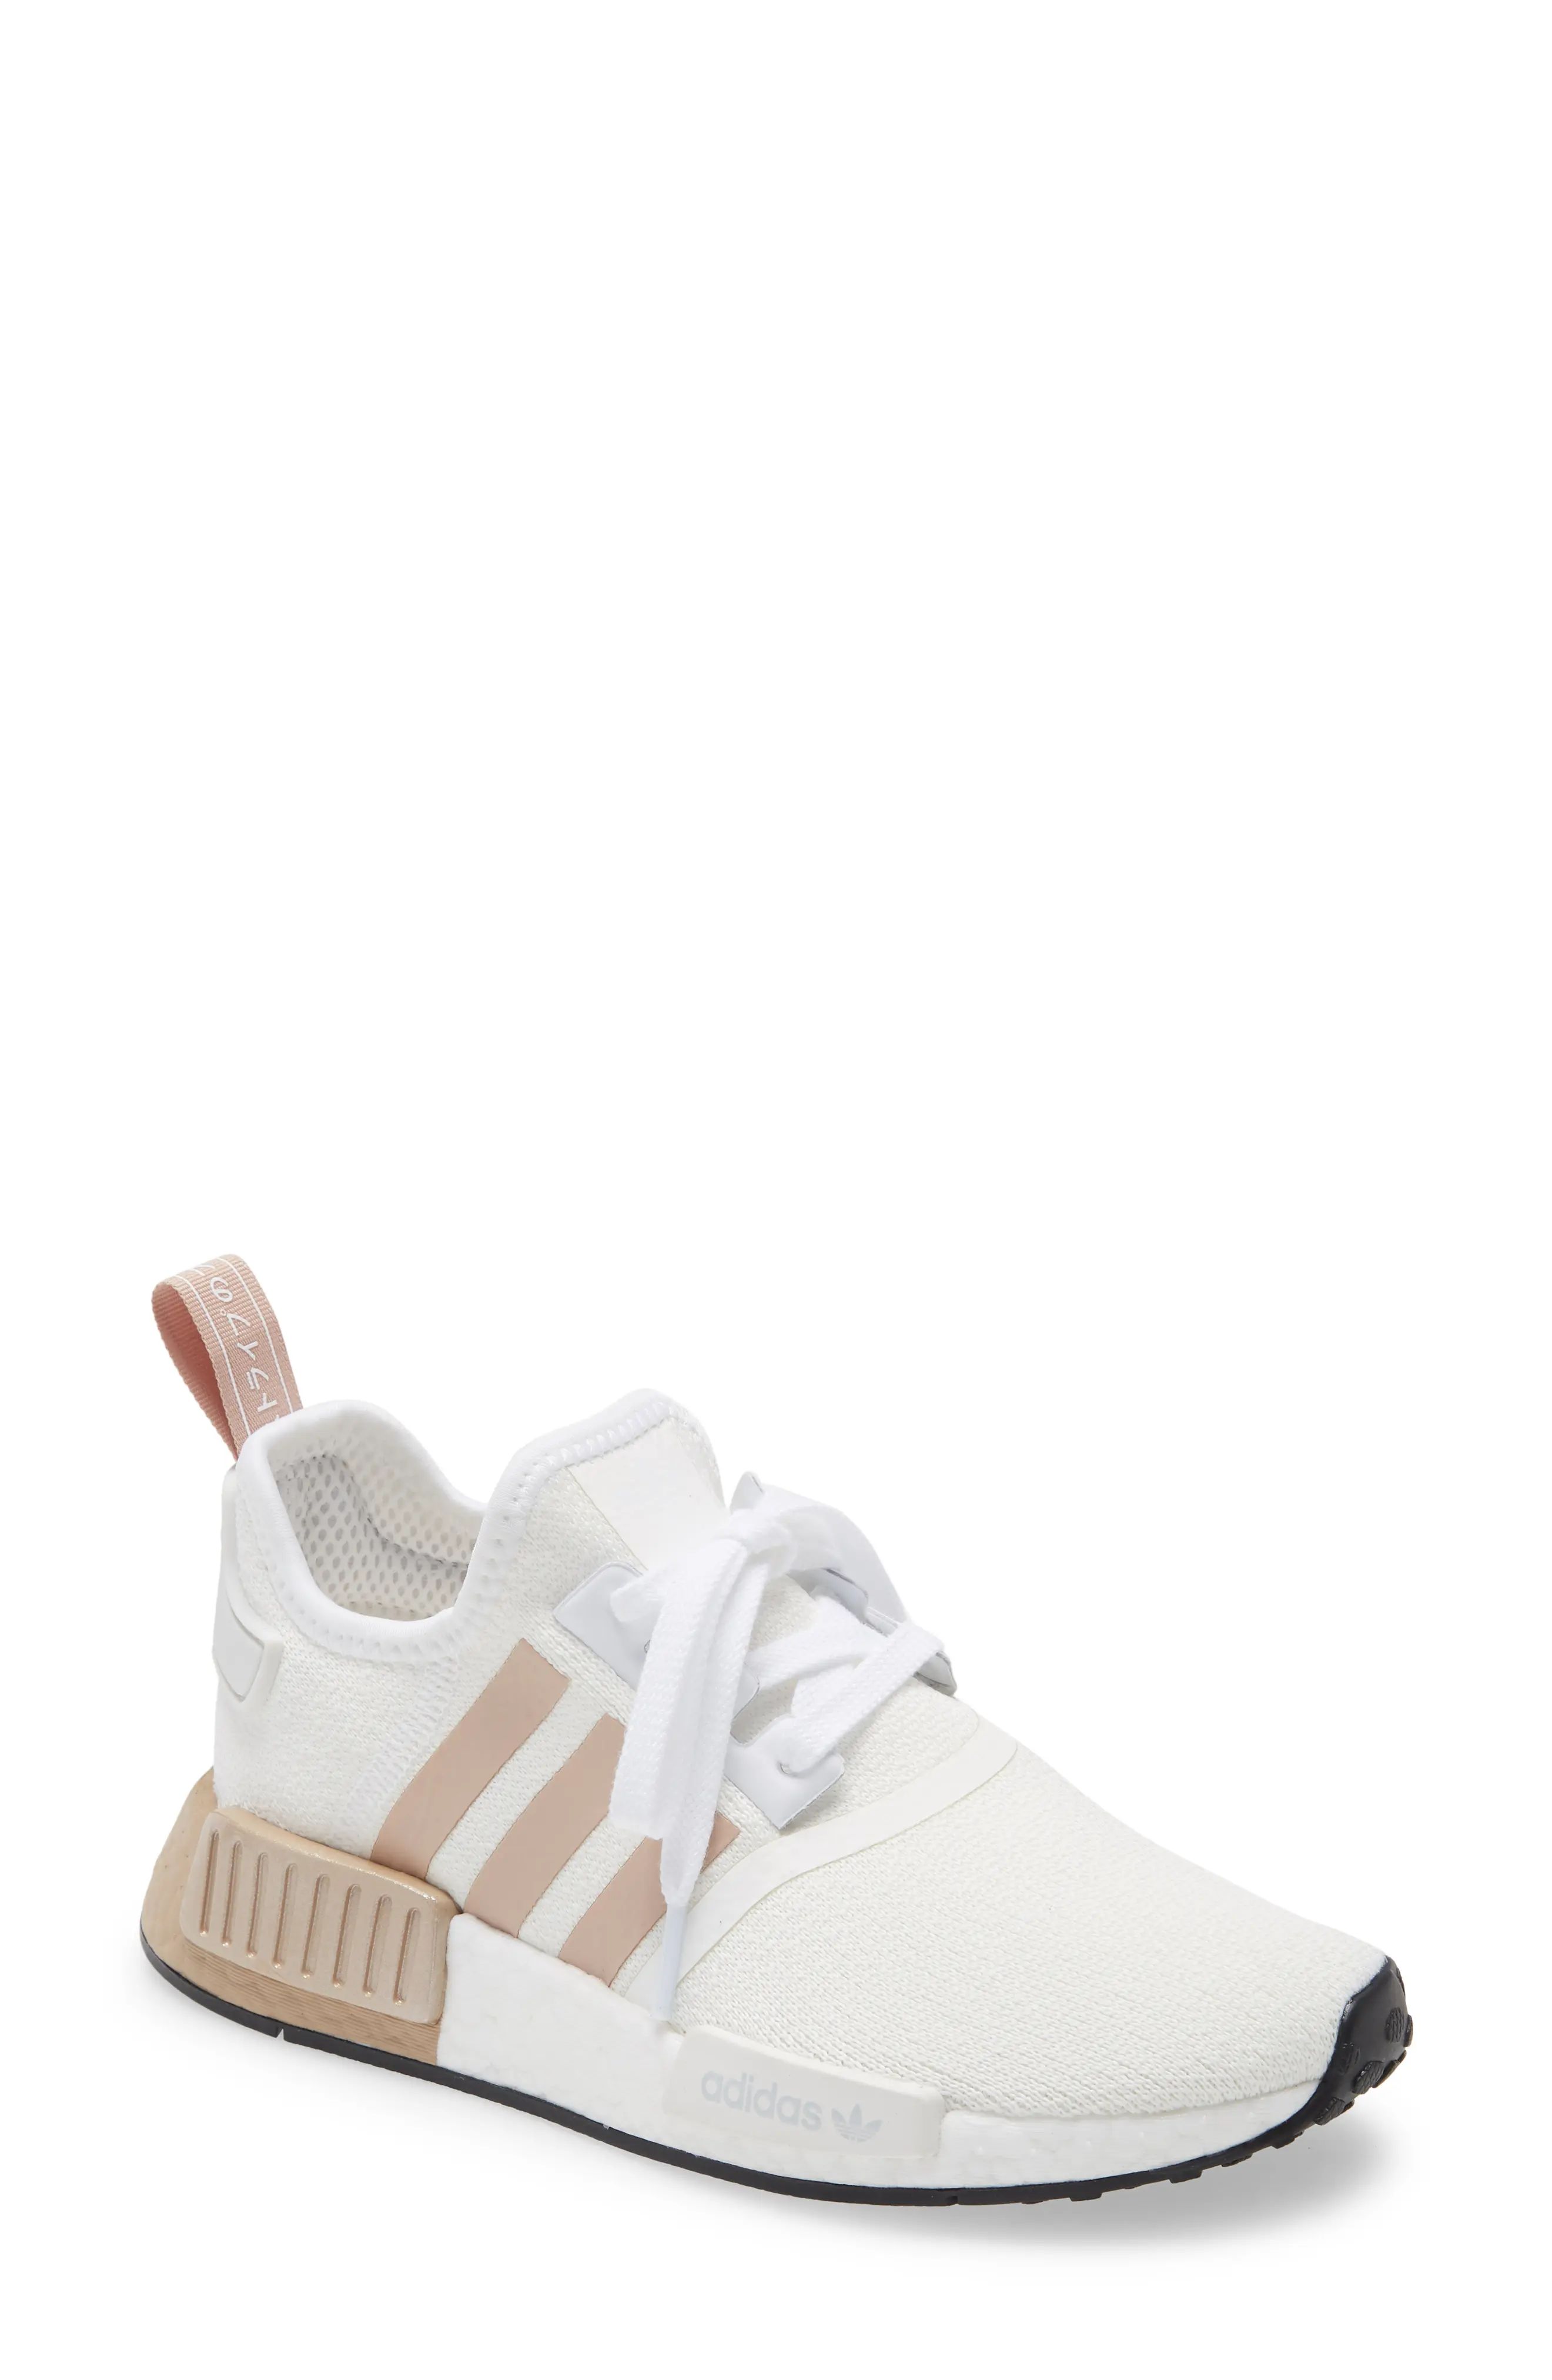 adidas NMD R1 Sneaker in White/Ash Pearl/White at Nordstrom, Size 6 | Nordstrom